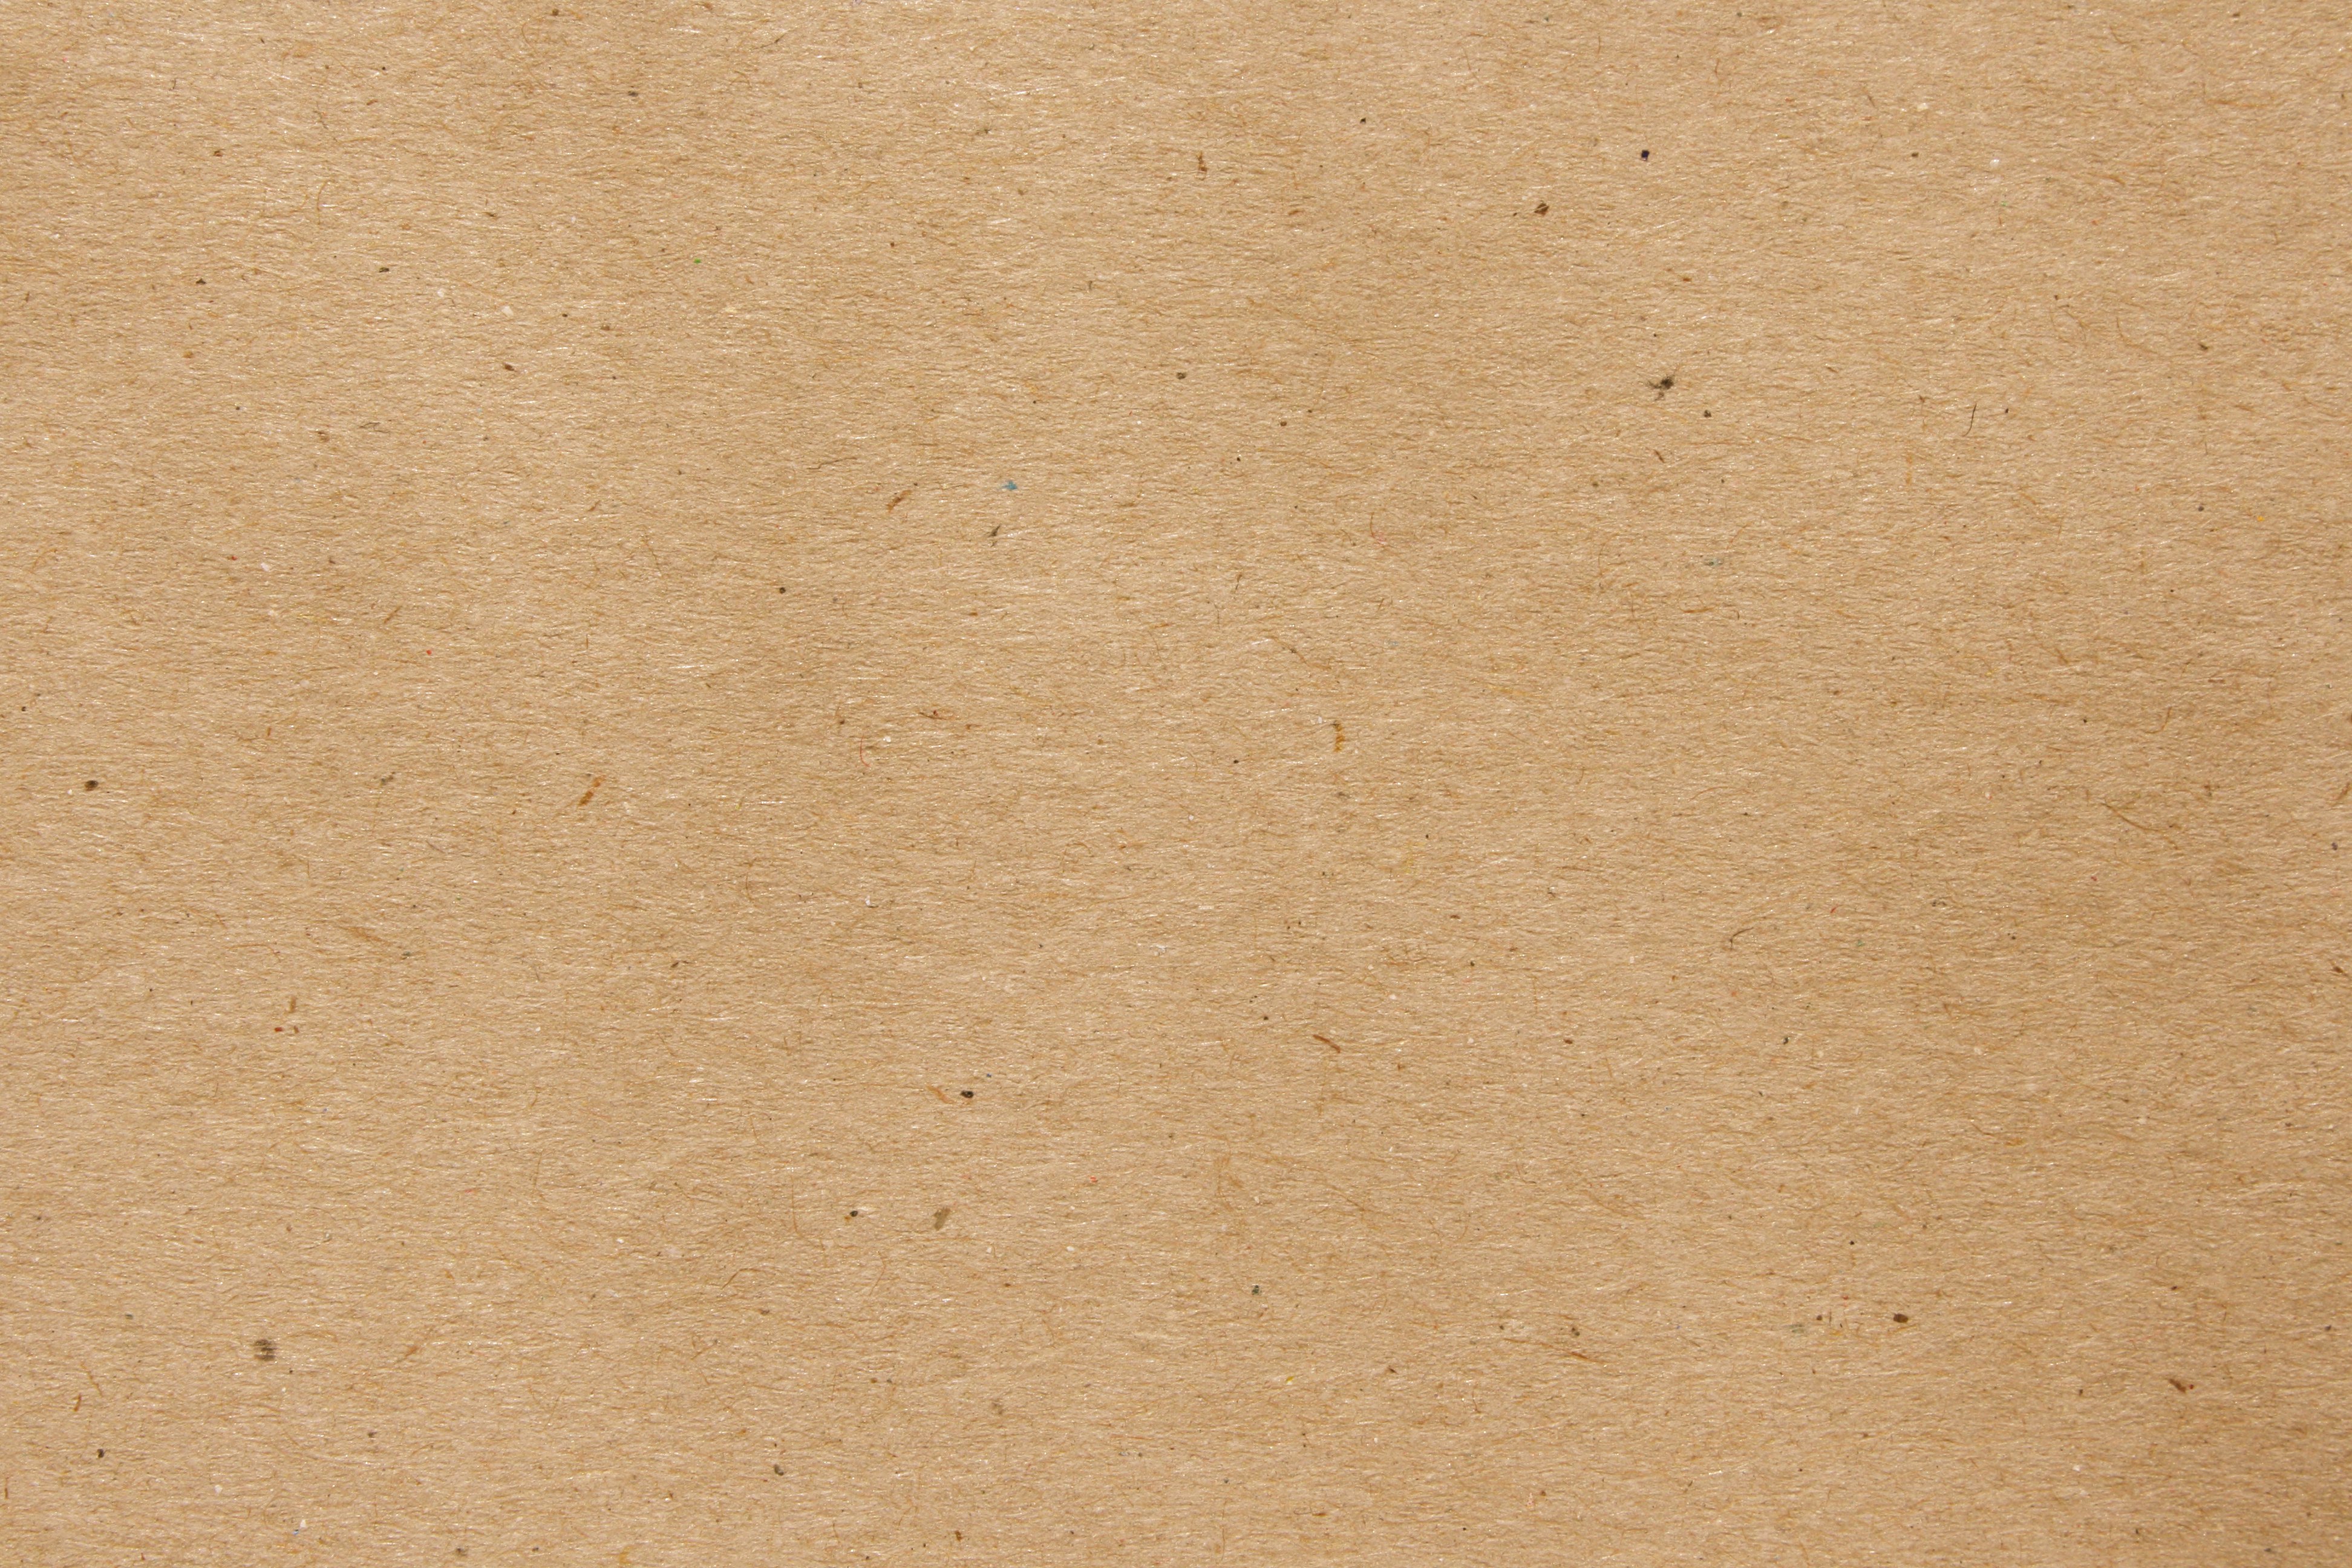 Light Brown or Tan Paper Texture with Flecks Picture, Free Photograph